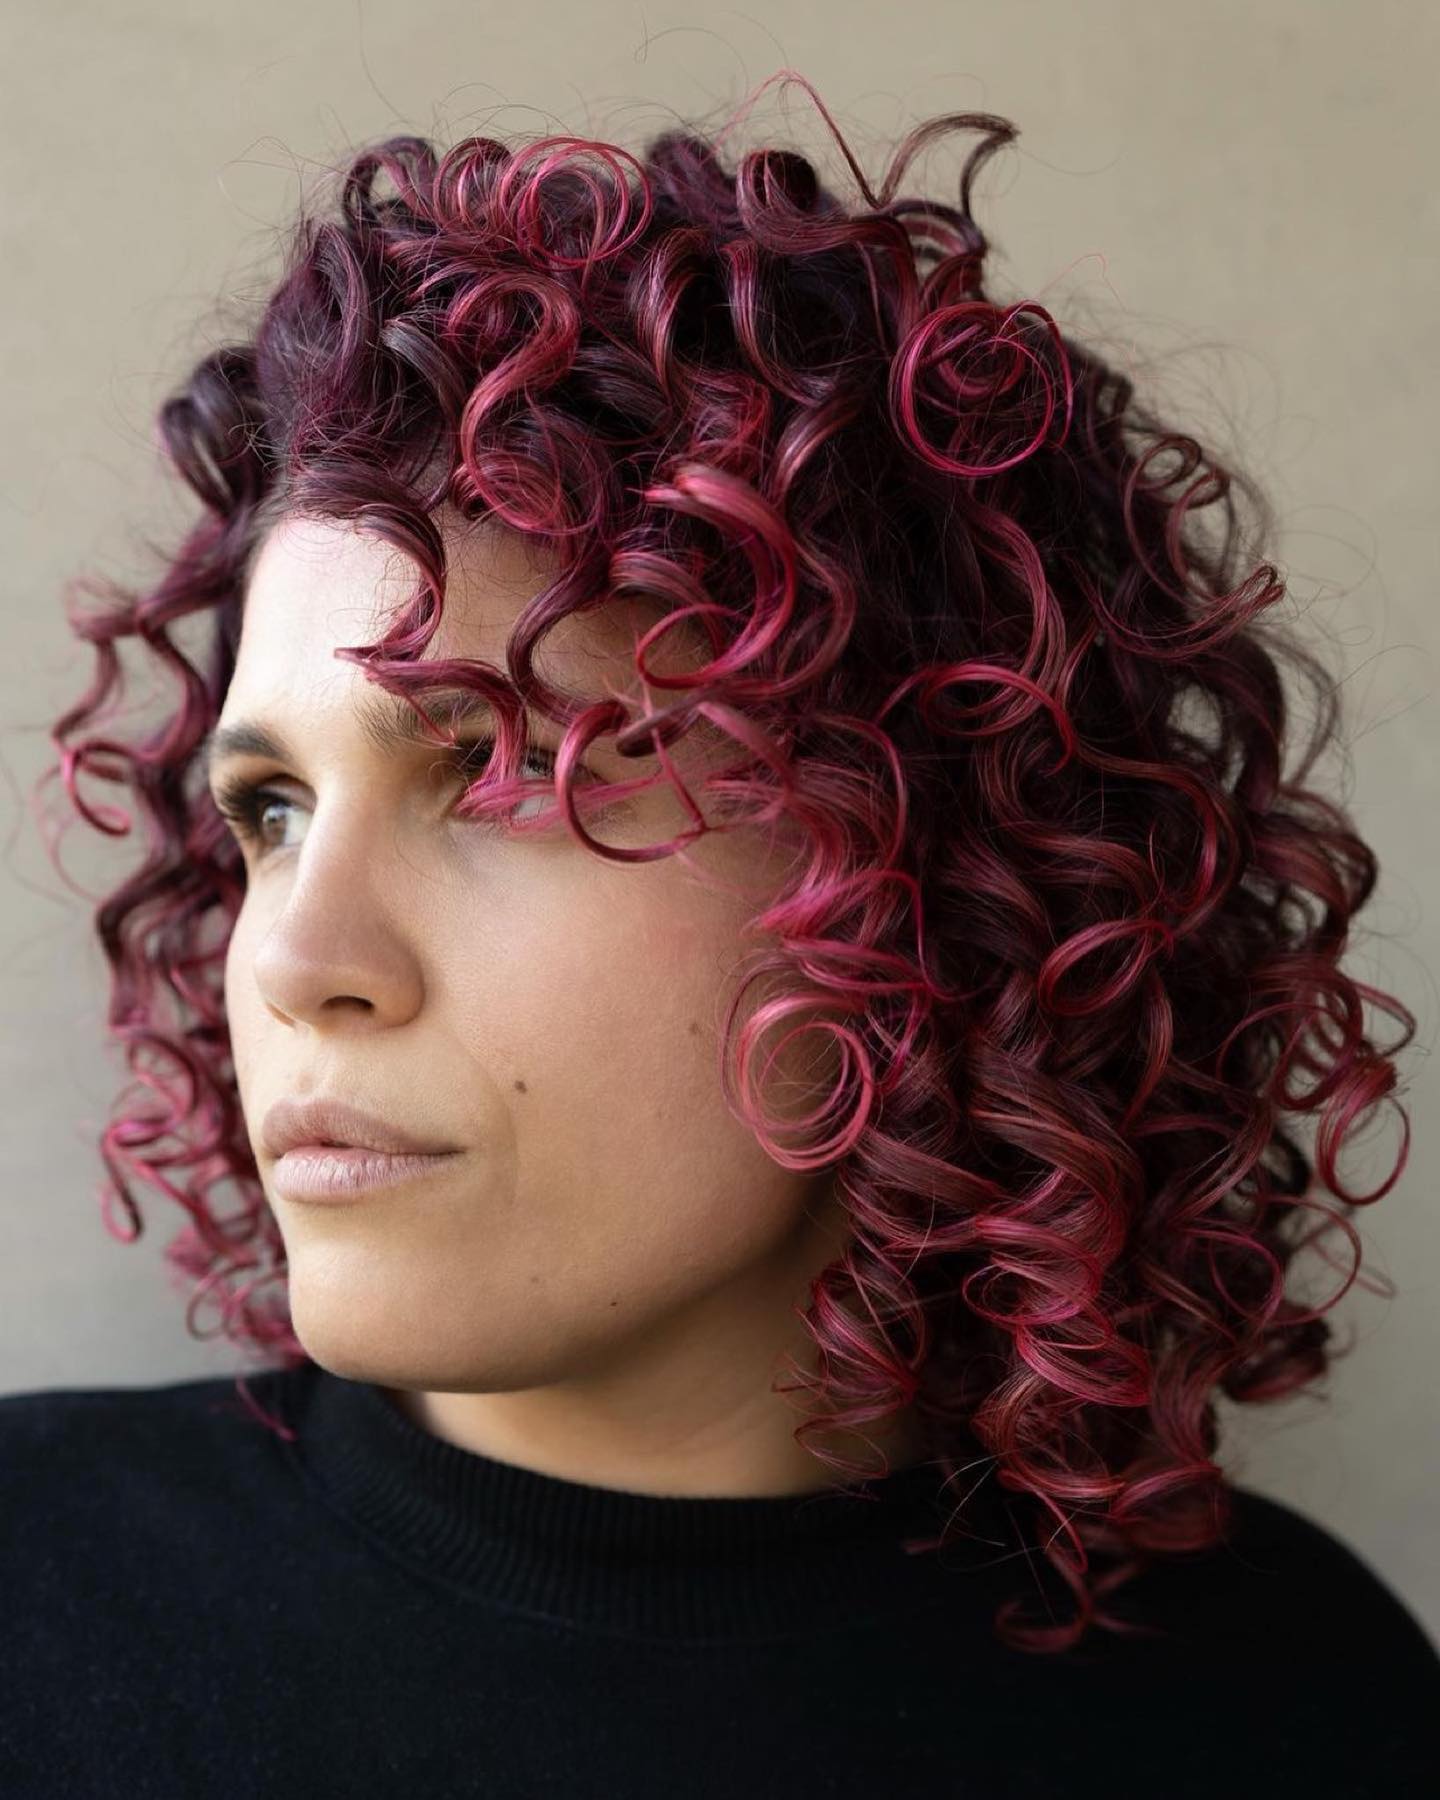 Pink Highlights on Short Curly Hair